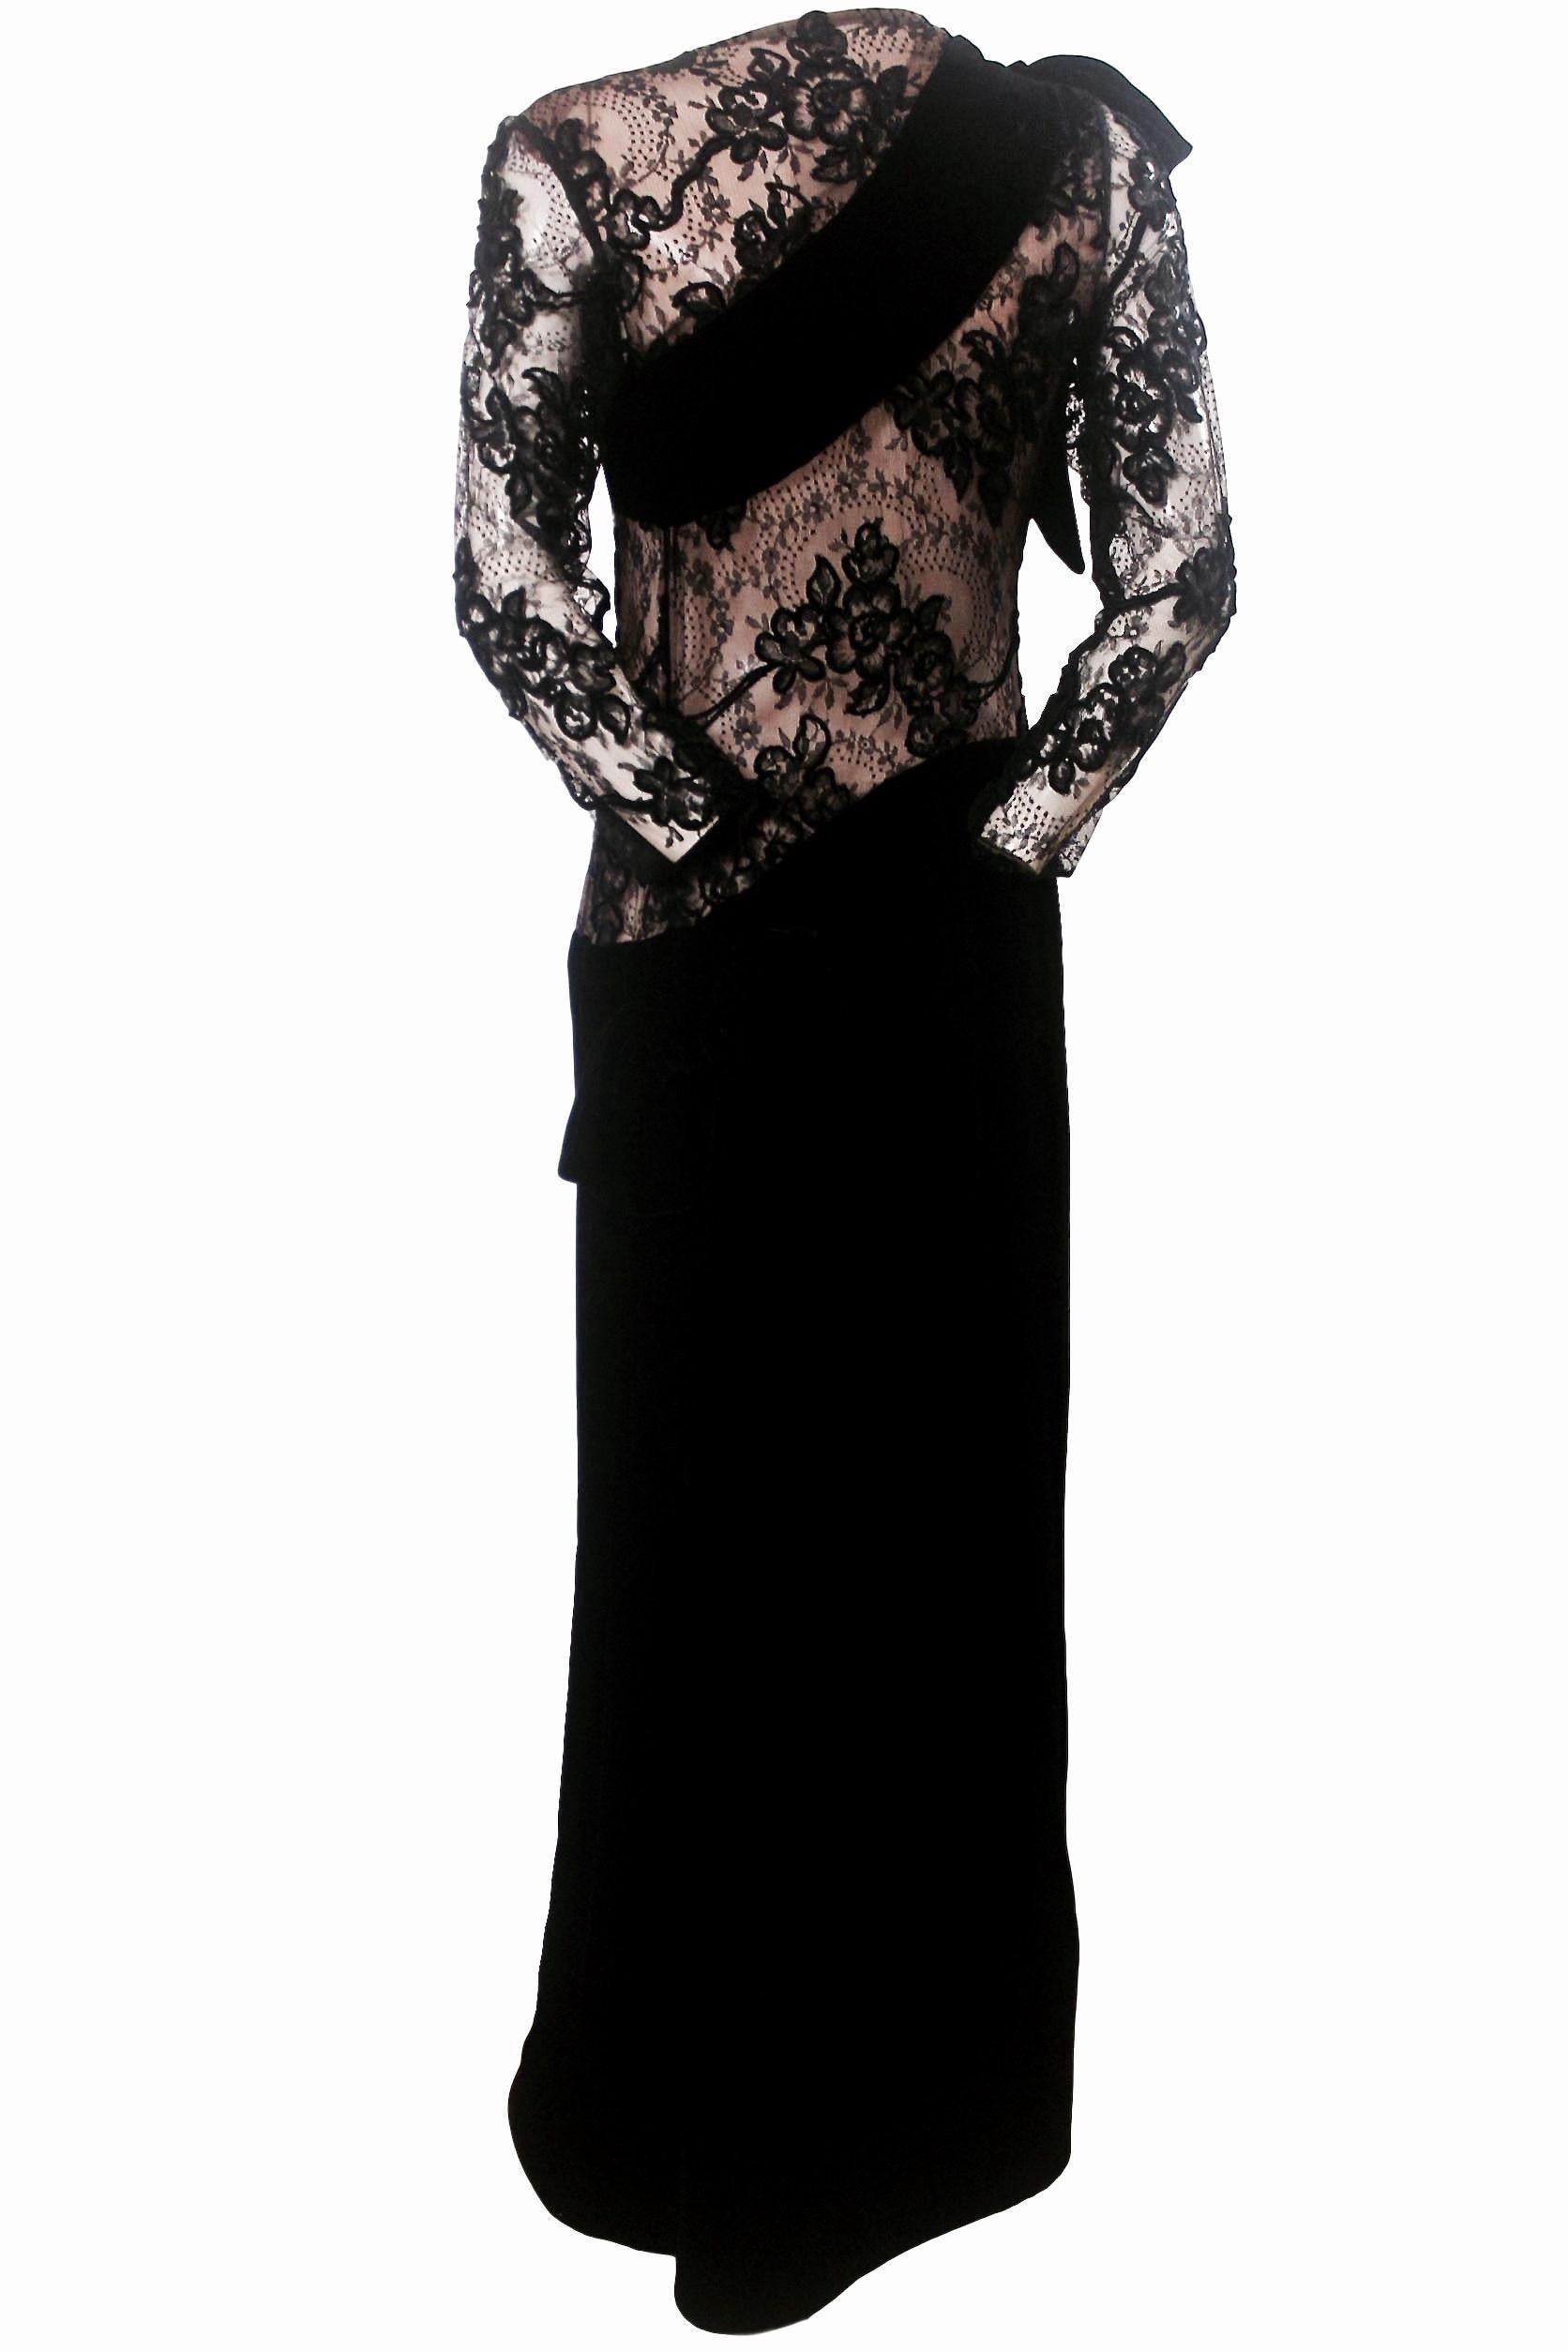 Jacqueline de Ribes Velvet and Lace Evening dress with Large Bows For Sale 4